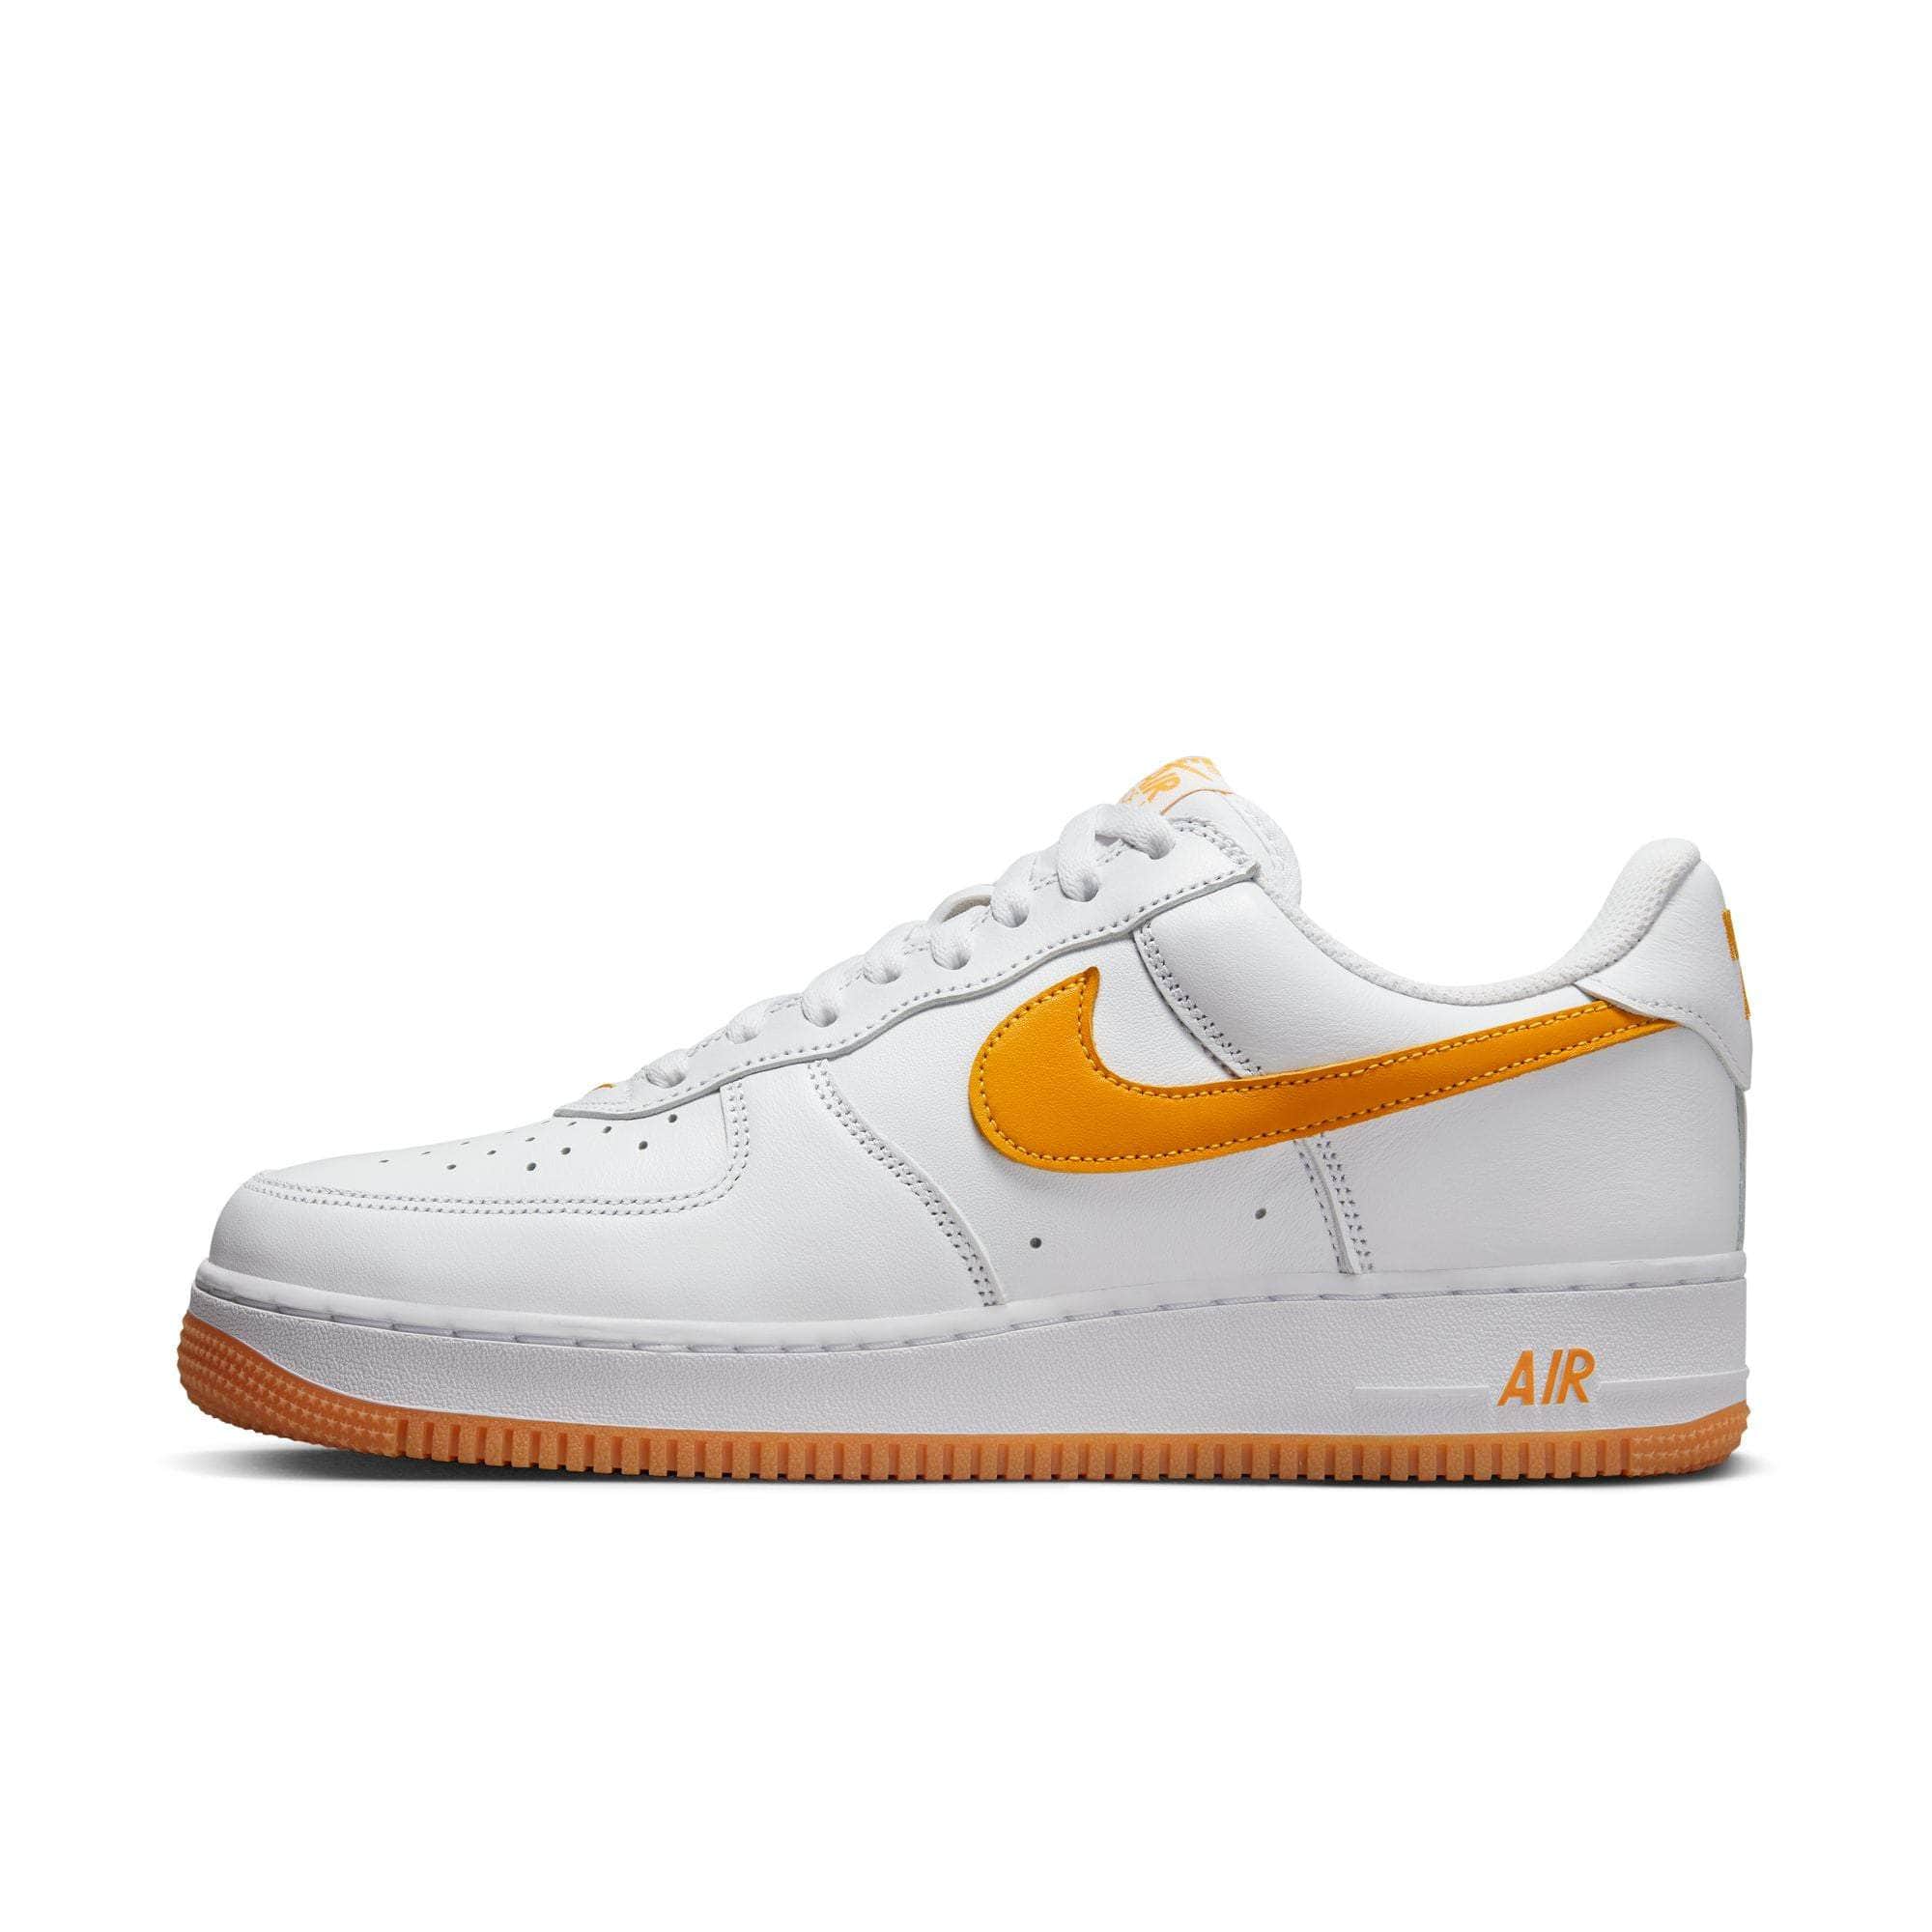 Nike Airforce 1 Low X Off White University Gold Men'S Sneakers Shoes